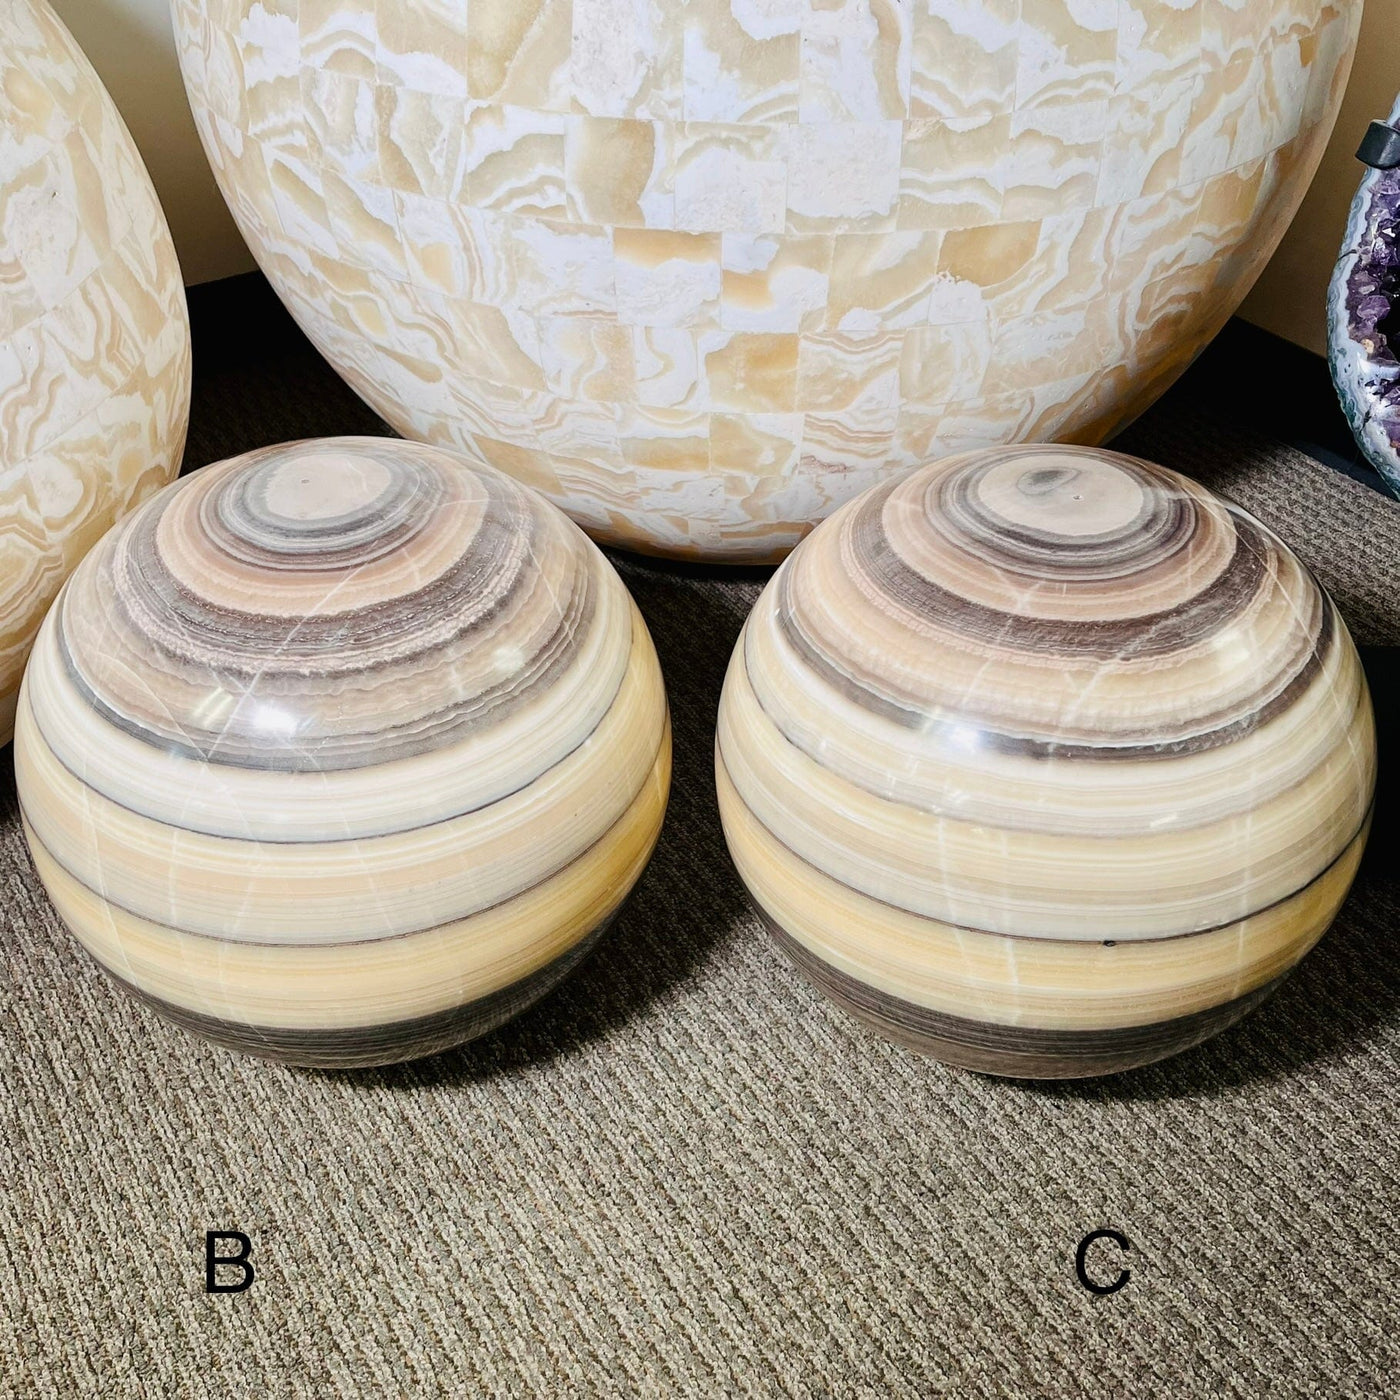 Mexican Onyx - Colossal Polished Sphere Options B and C pictured next to each other..